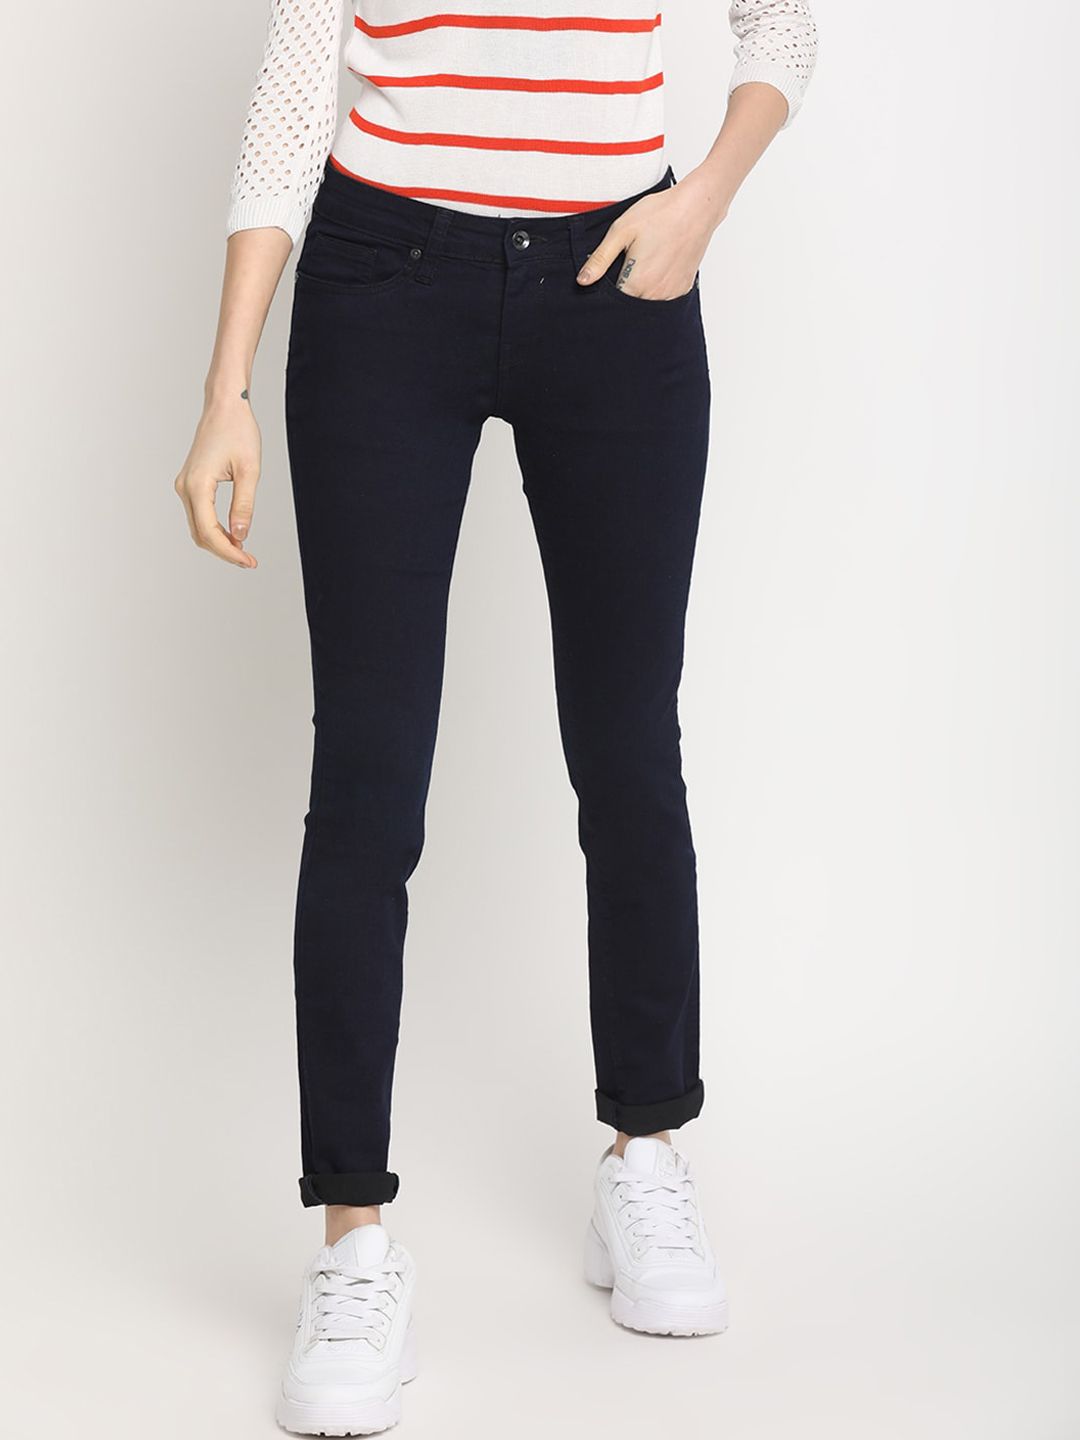 Pepe Jeans Women Navy Blue Regular Fit Mid-Rise Clean Look Jeans Price in India